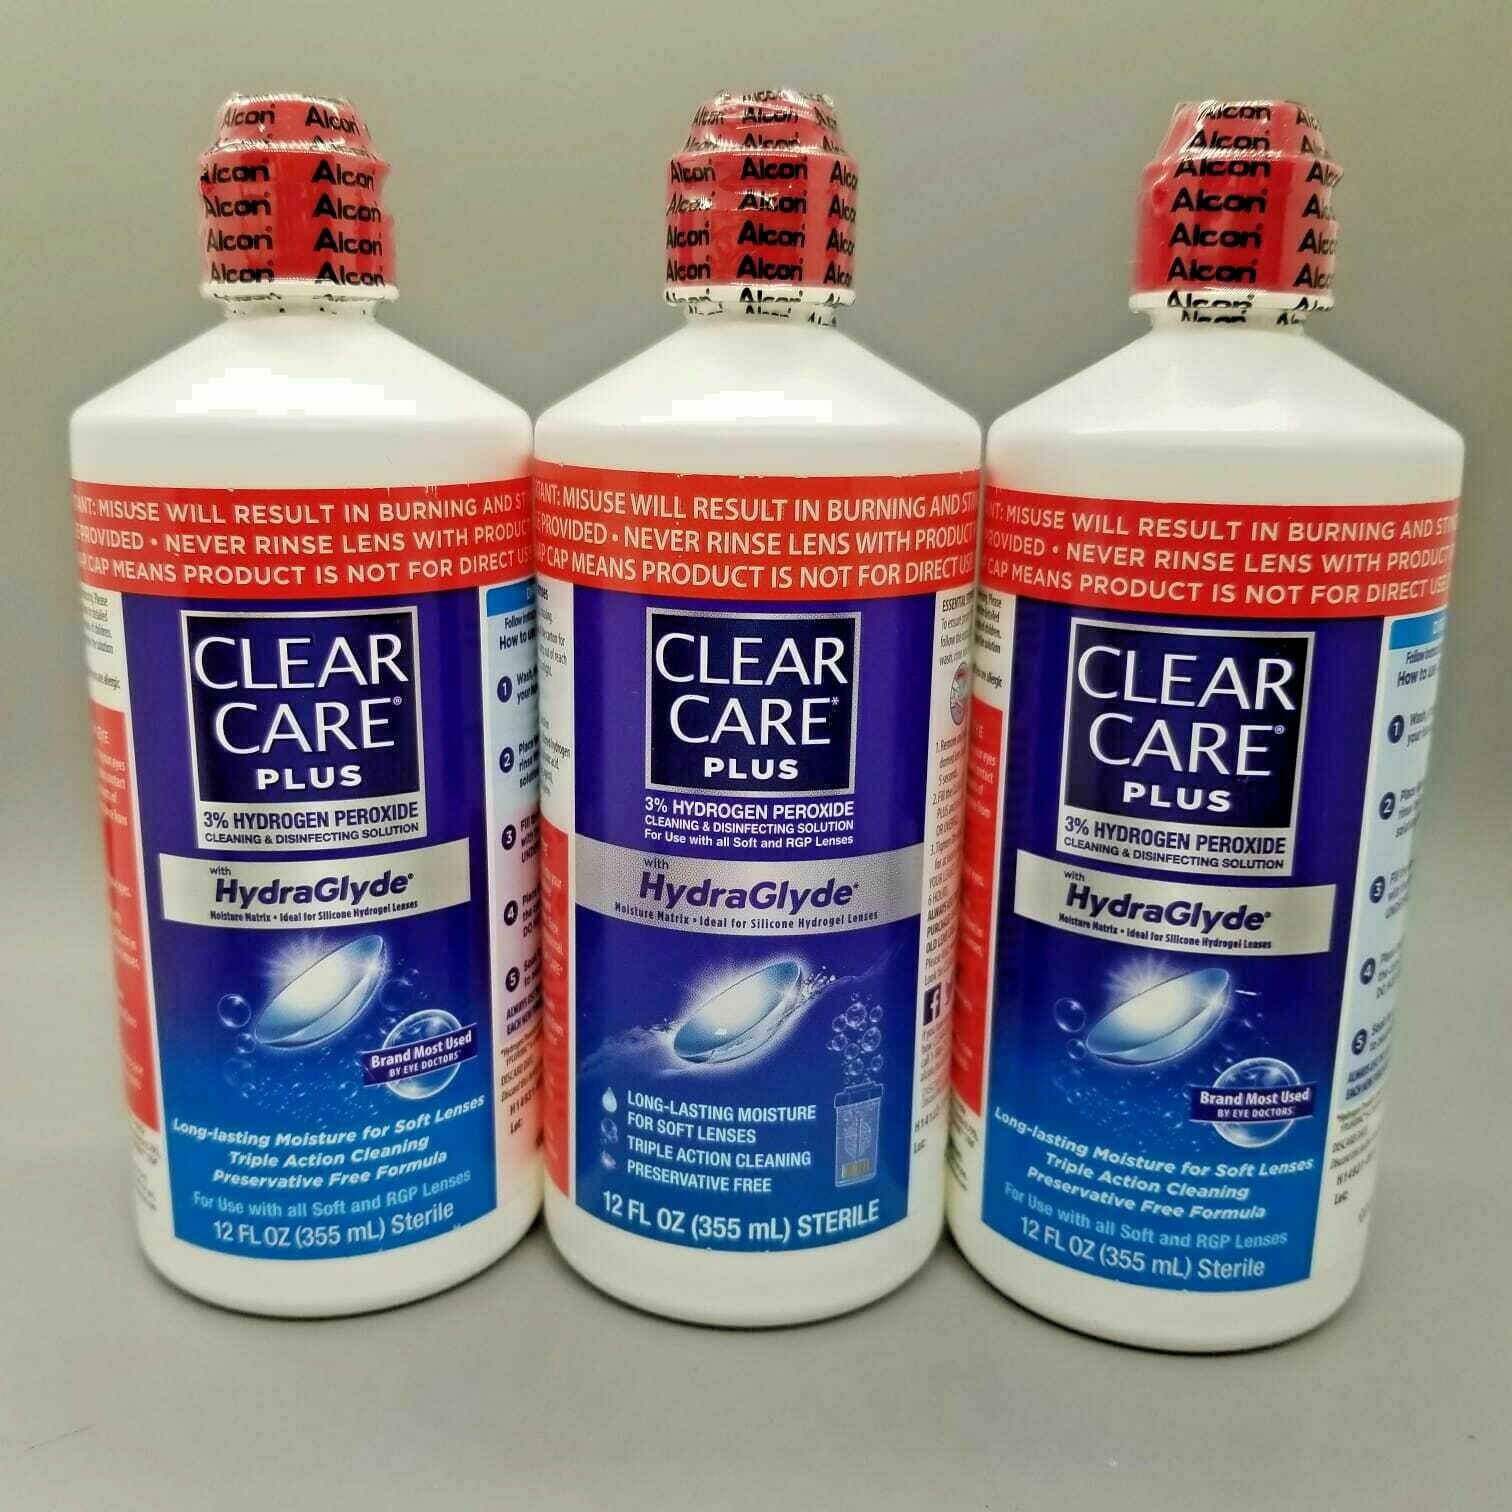 Clear Care Plus 3% Hydrogen Peroxide Solution W/ Hydraglyde 12oz 3pk Exp 11/21+